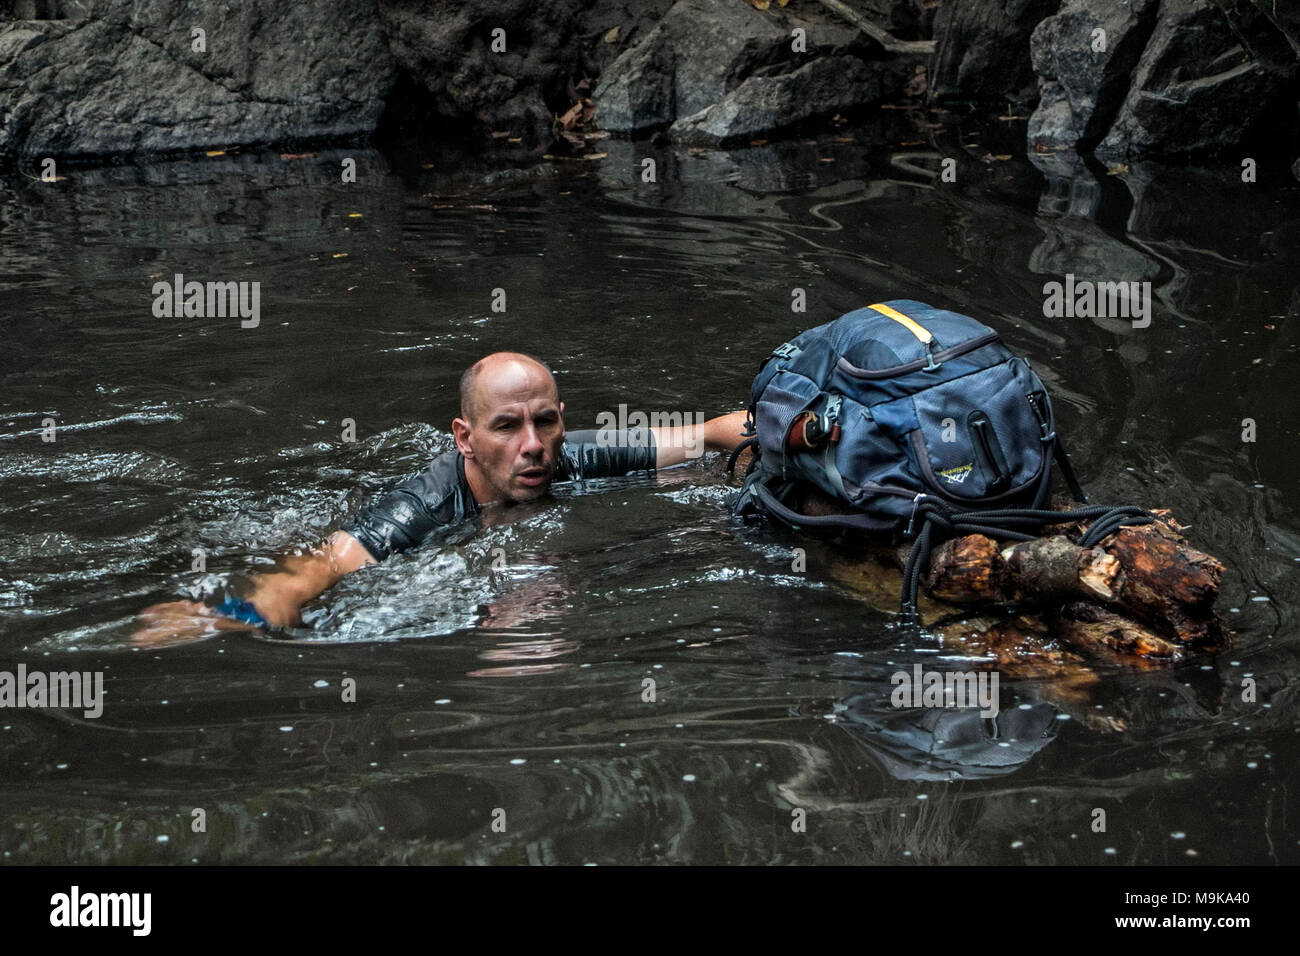 A man is swimming in a river and supporting a hand-made improvised raft with his backpack on. Concept of survival and exploration in the wilderness Stock Photo